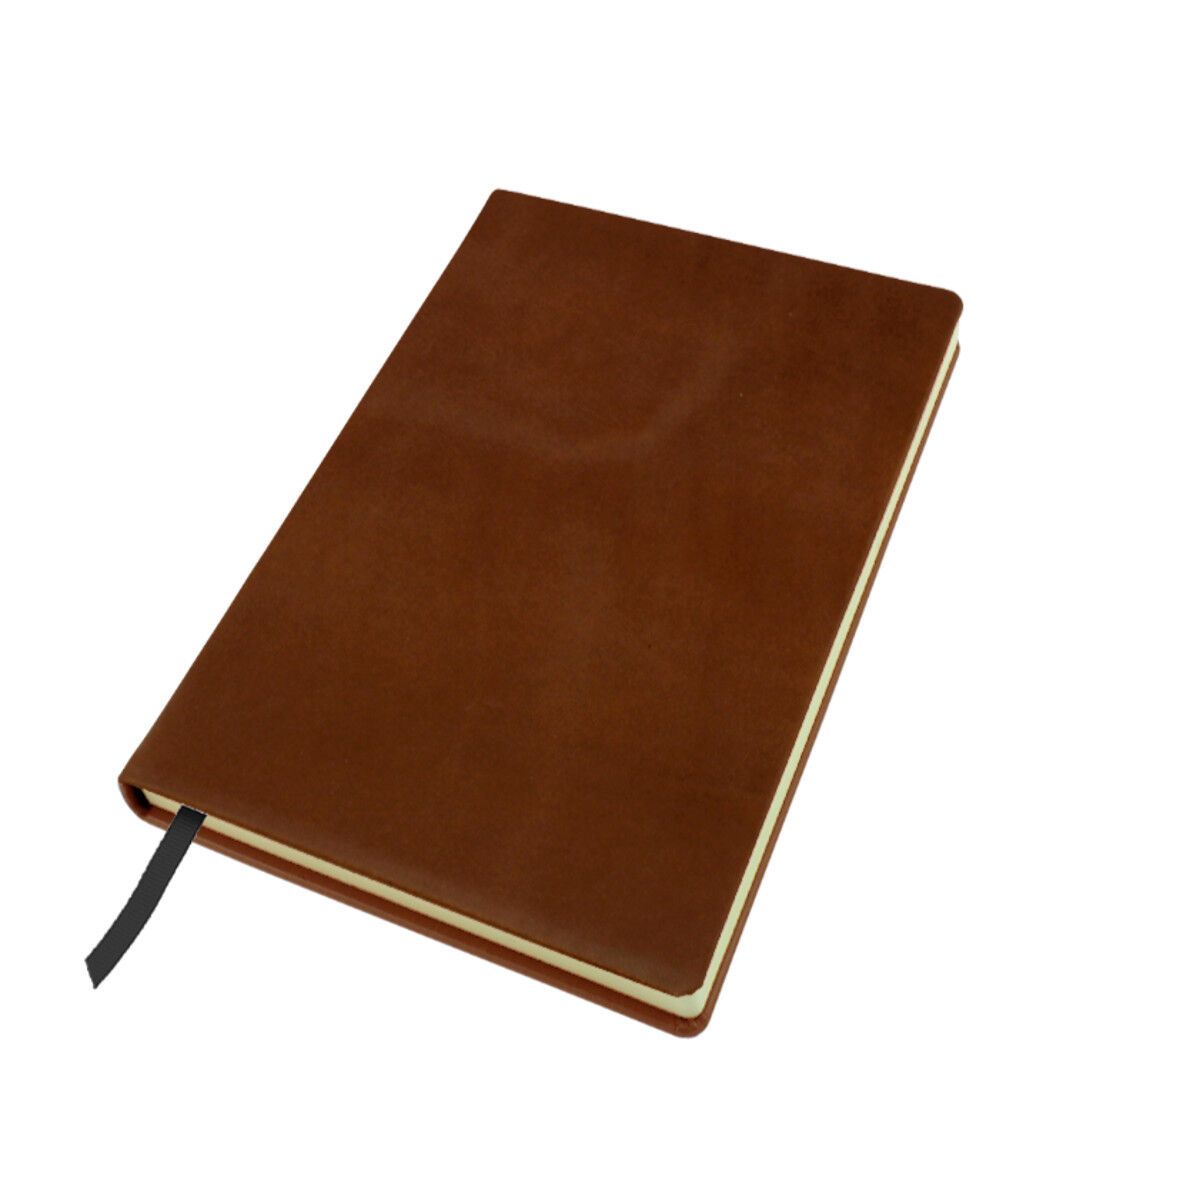 Casebound notebook with nappa leather cover